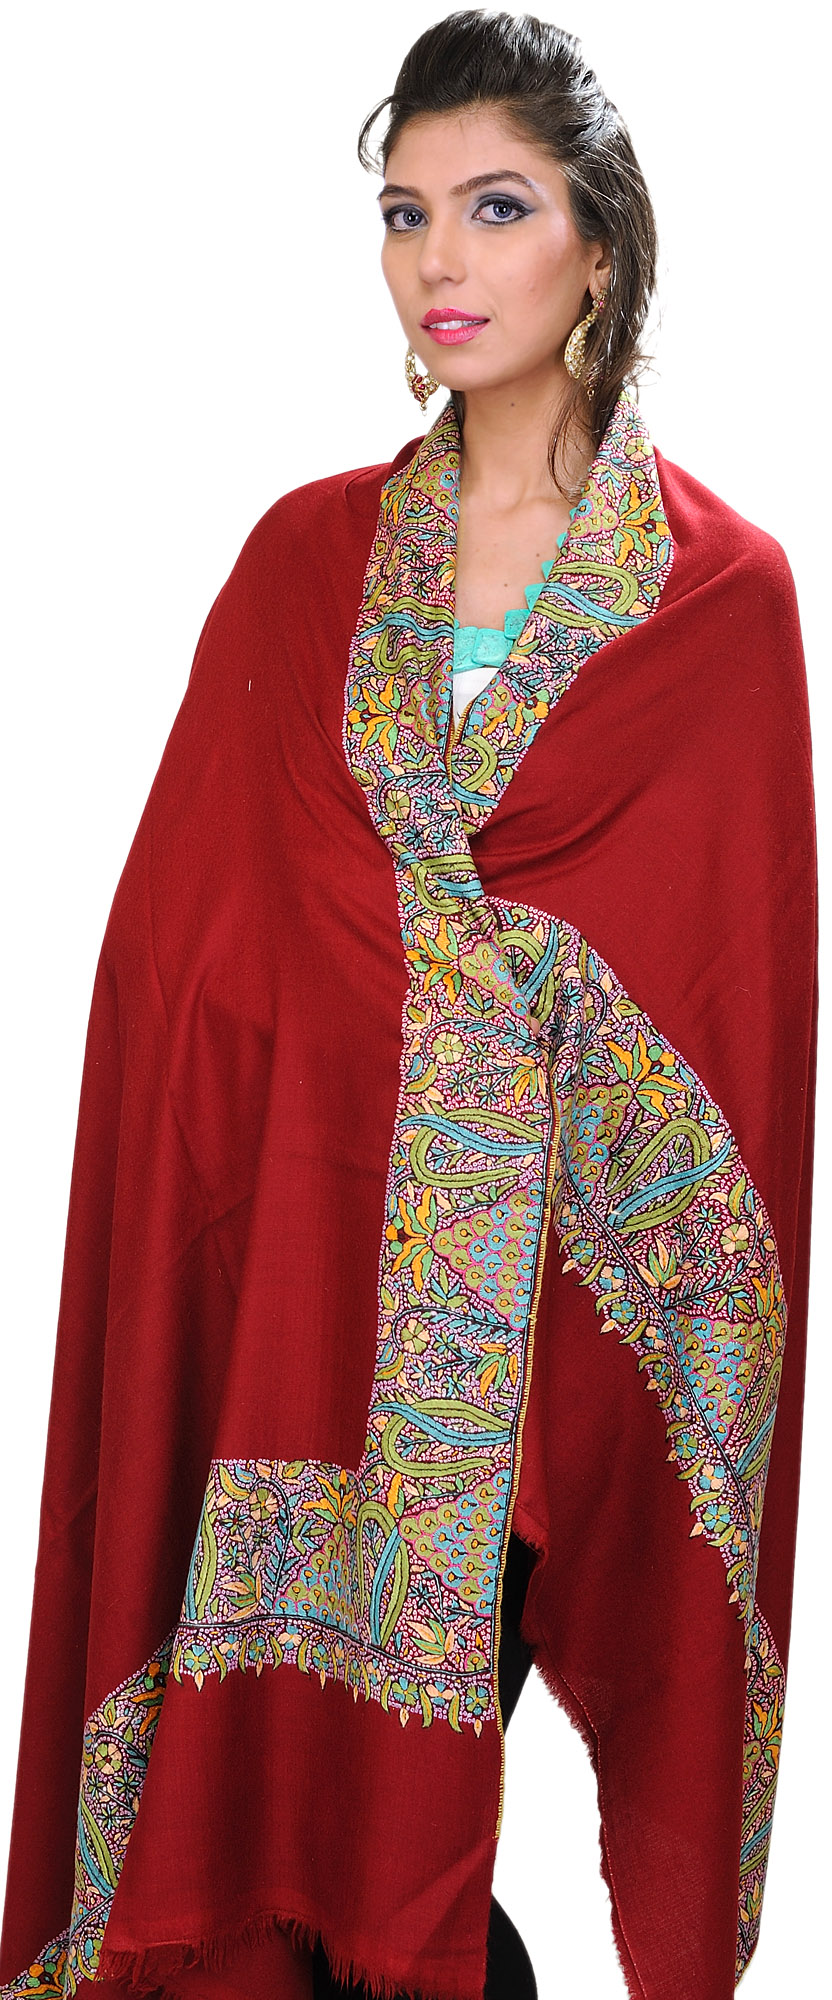 Burnt-Red Plain Kashmiri Shawl with Hand Embroidered Flowers on Border ...